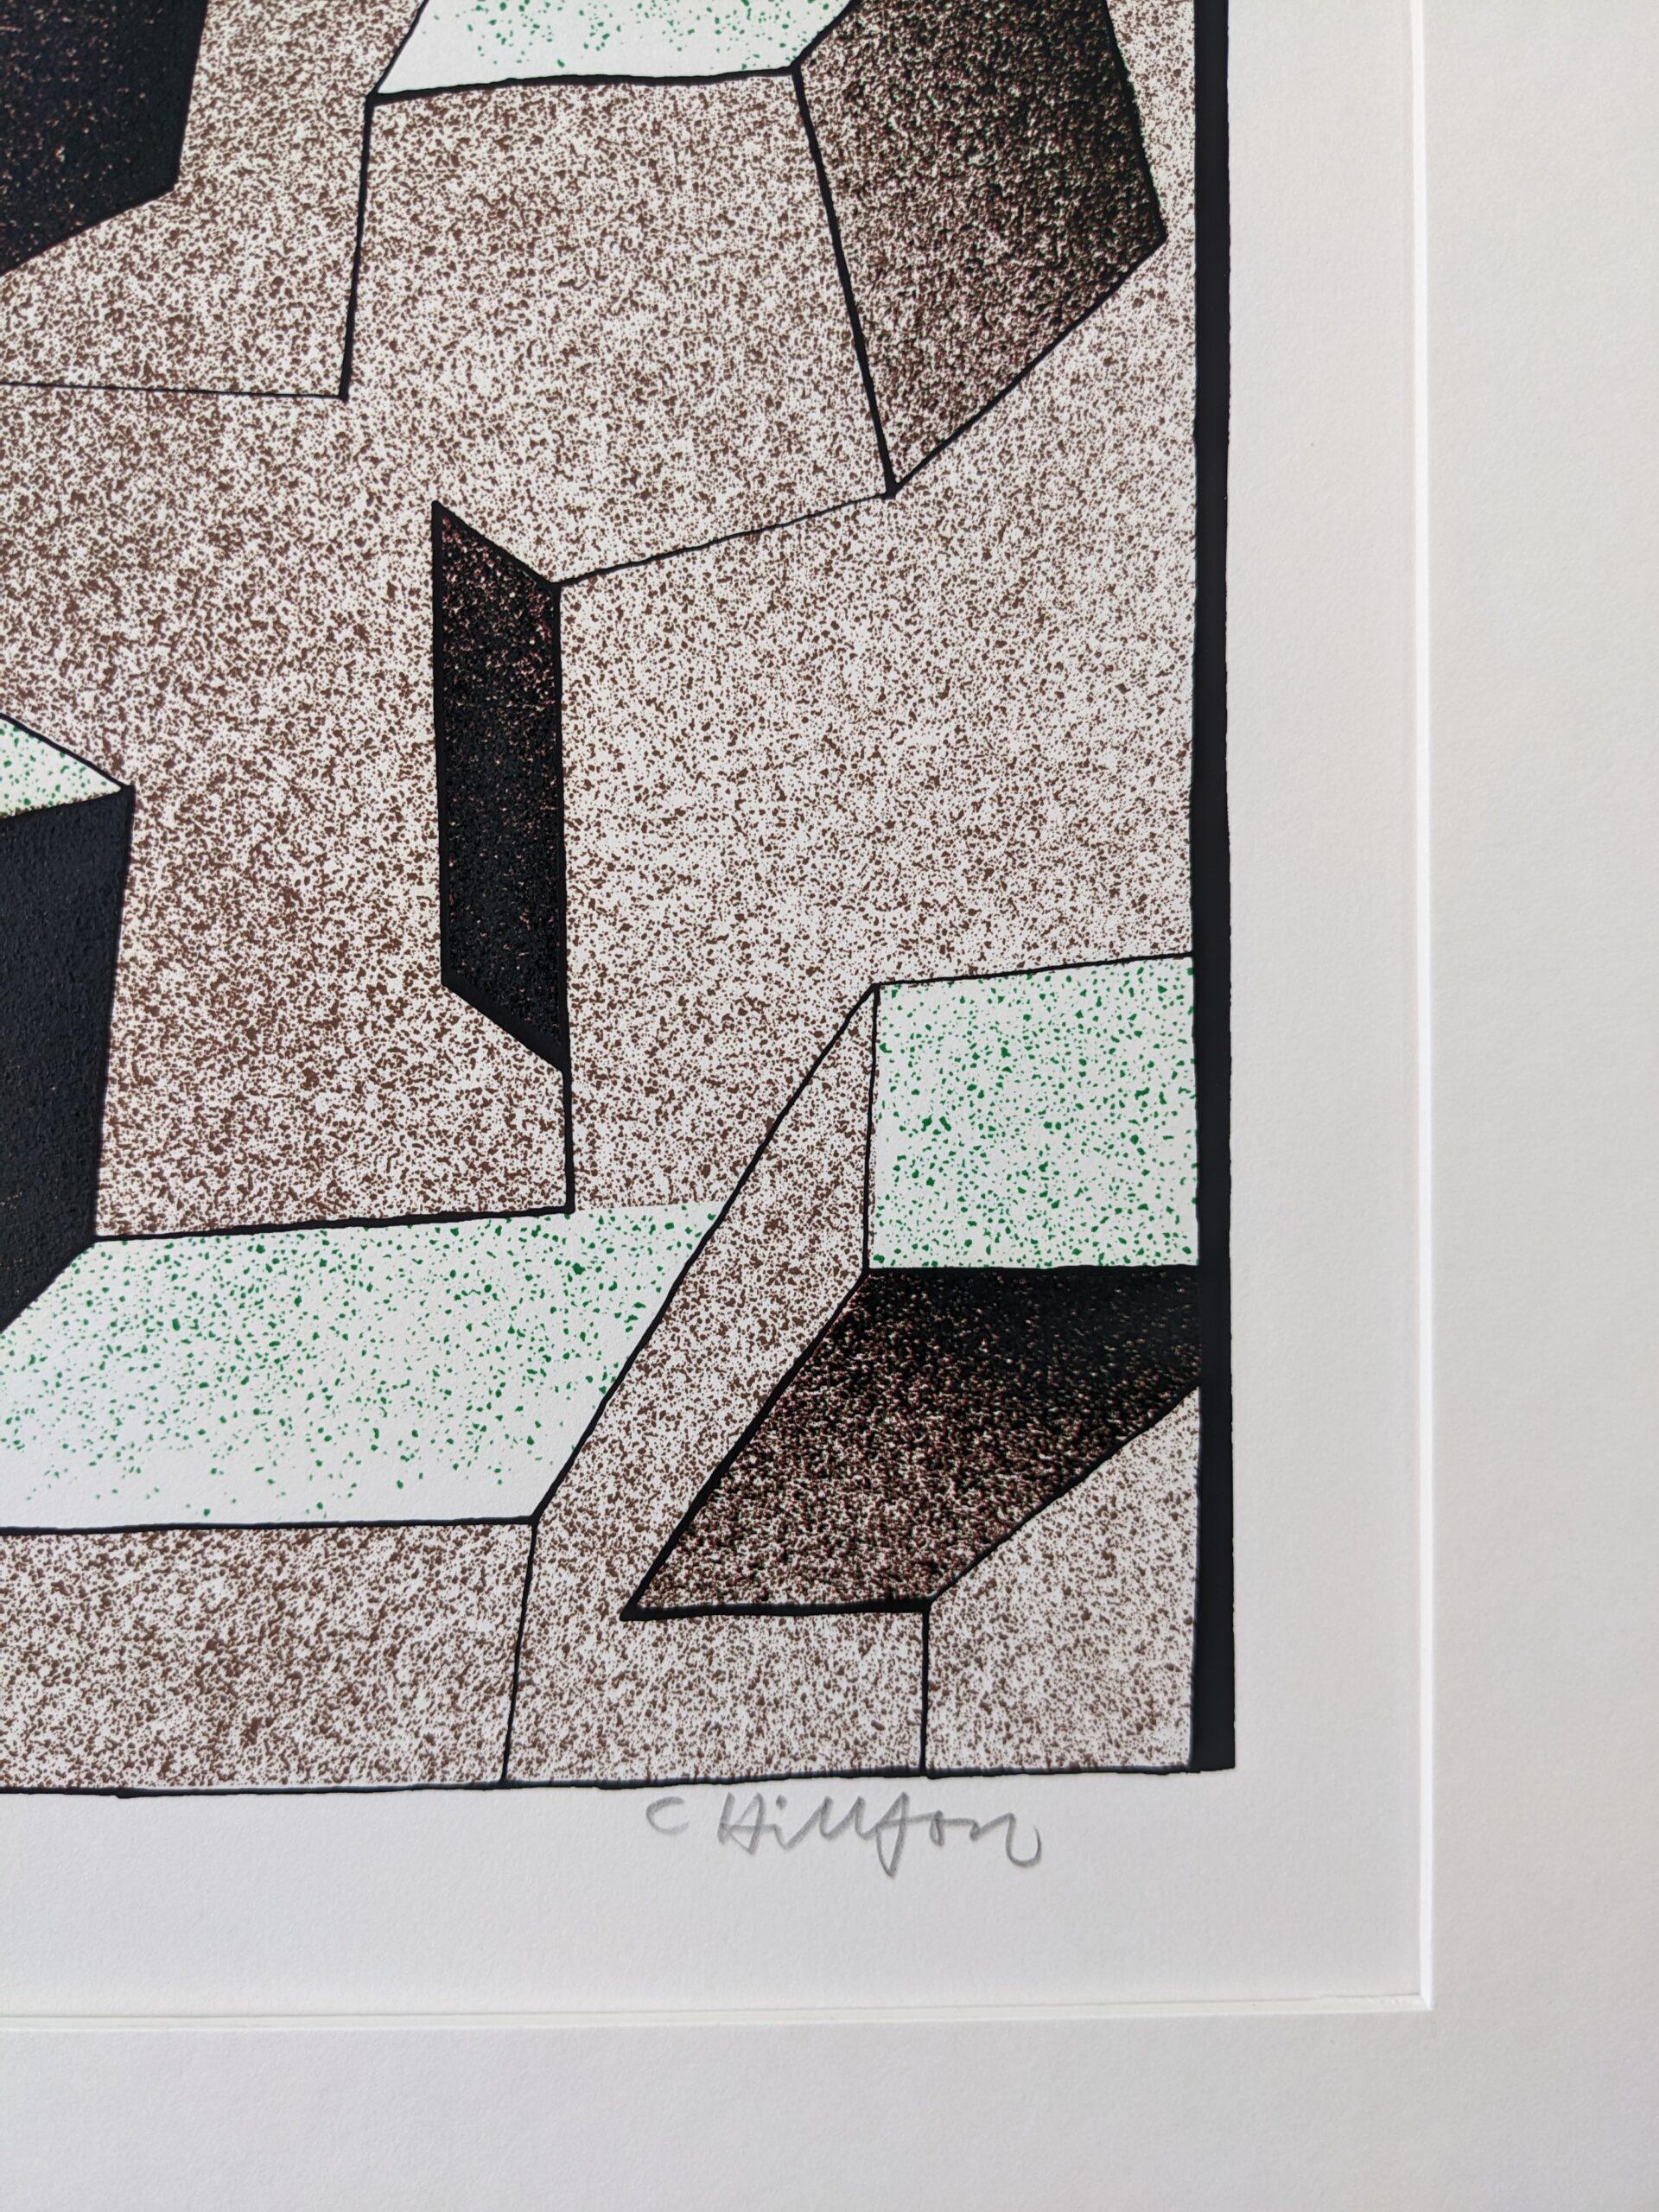 KINETIC SHAPES
Size: 52 x 42 cm (including frame)
Lithograph on paper

A very well presented mid century limited edition (1/211) colour lithograph, signed and numbered in pencil by Swedish artist Curt Hillfon.

The artist has used shadows and tonal